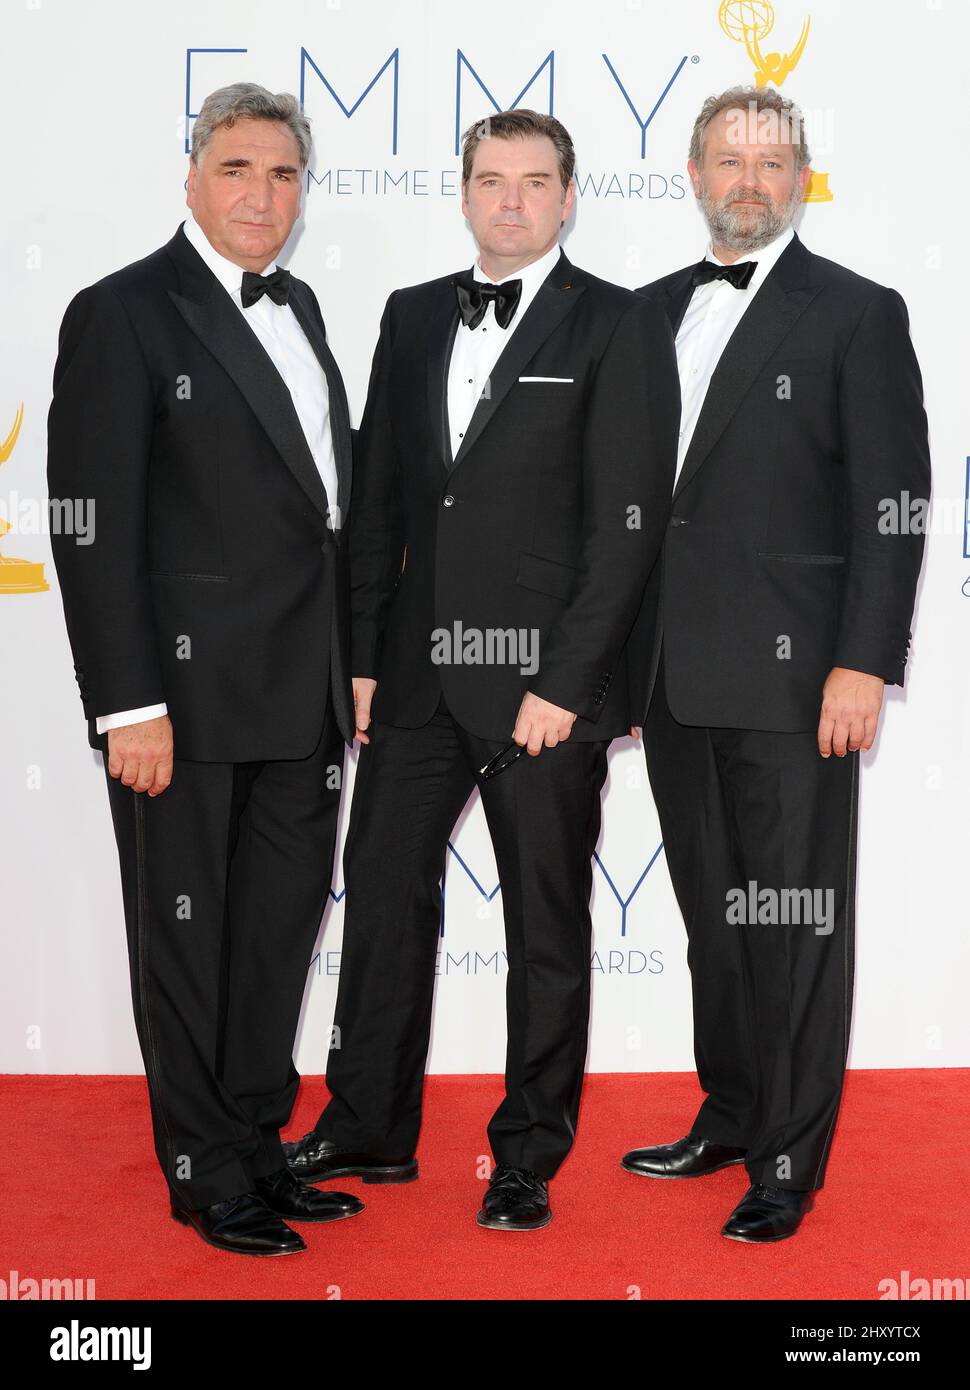 Jim Carter, Hugh Bonneville and Brendan Coyle attends the 64th Primetime Emmy Awards held at the Nokia Theatre, Los Angeles. Stock Photo